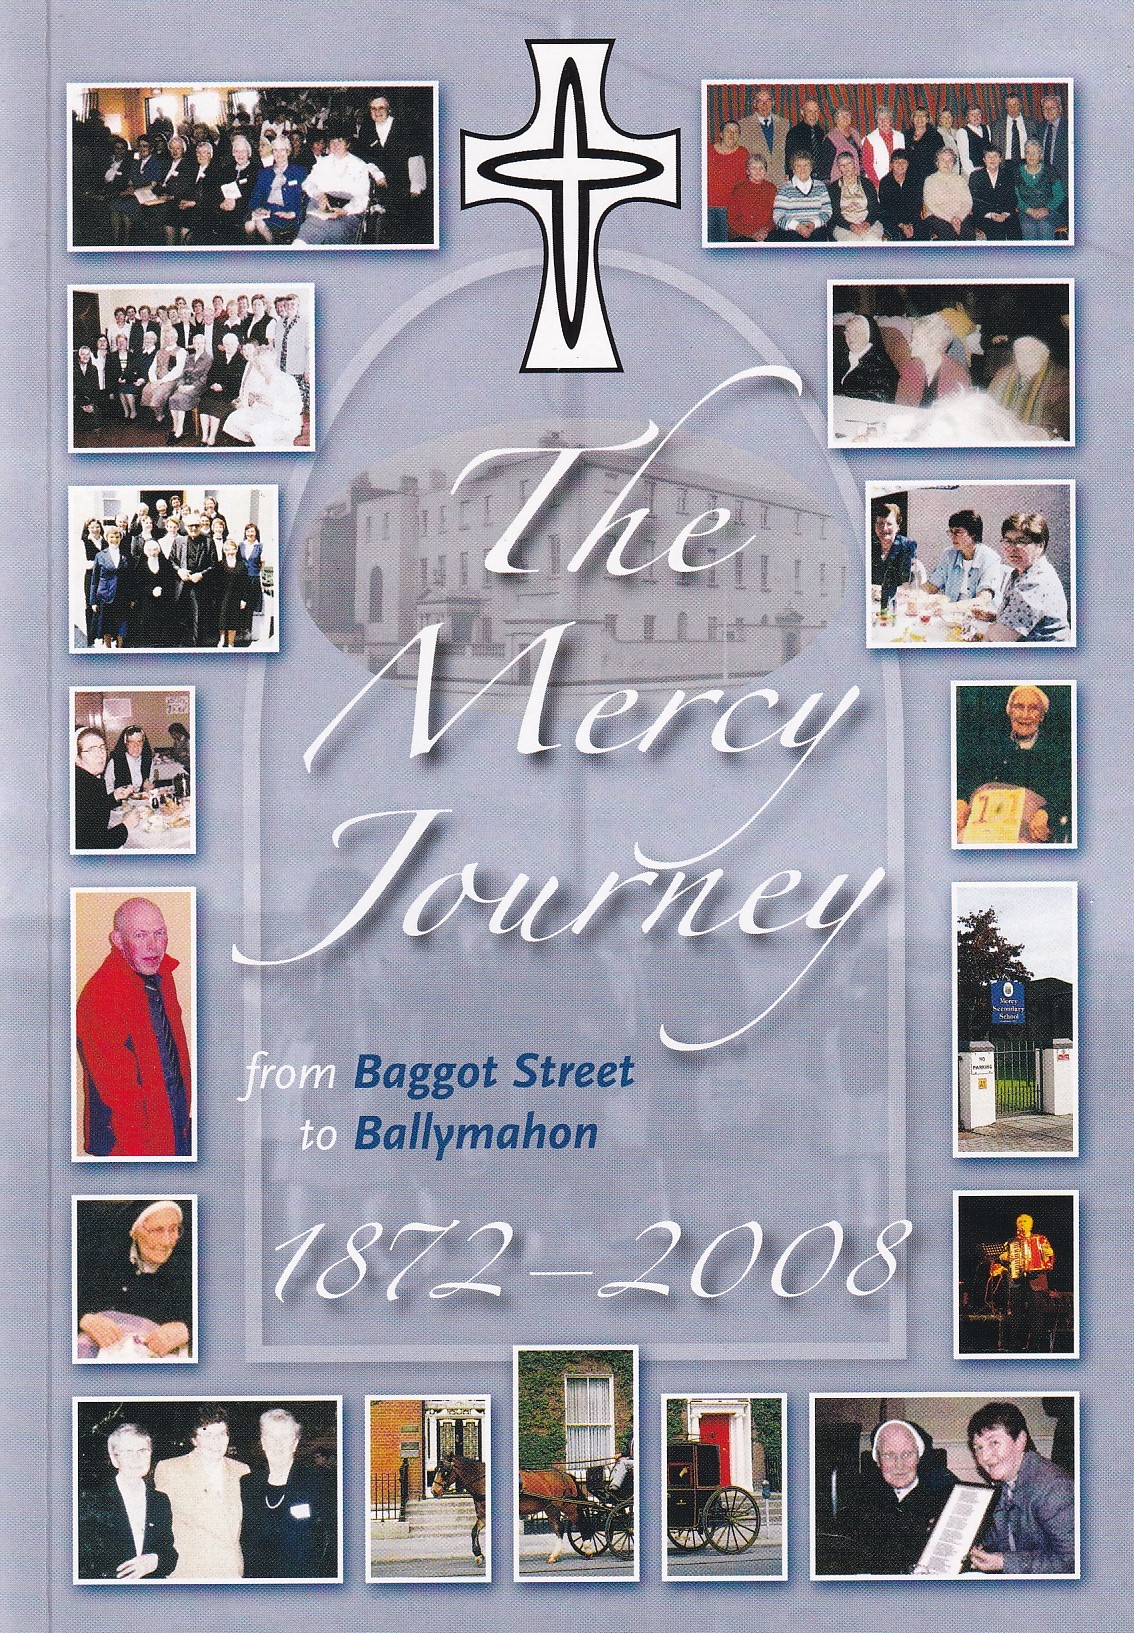 The Mercy Journey: from Baggot Street to Ballymahon, 1872-2008 | Ballymahon Local History Group | Charlie Byrne's